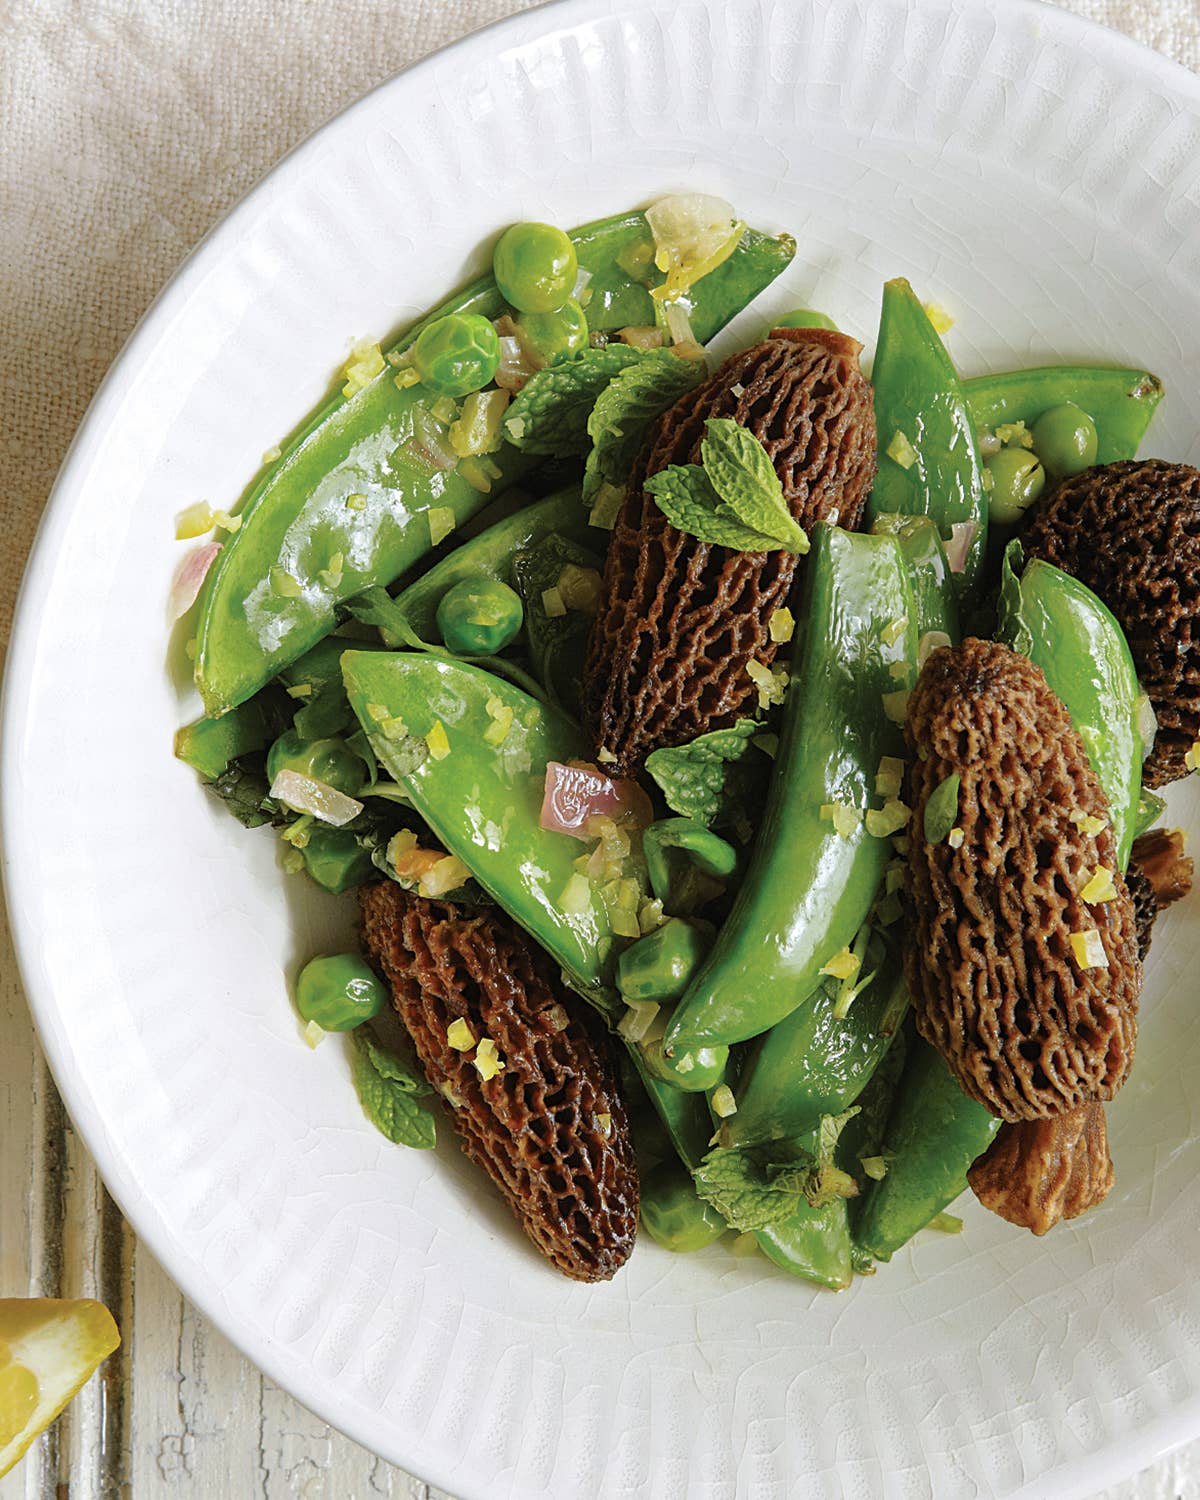 Morels with Mint, Peas, and Shallot